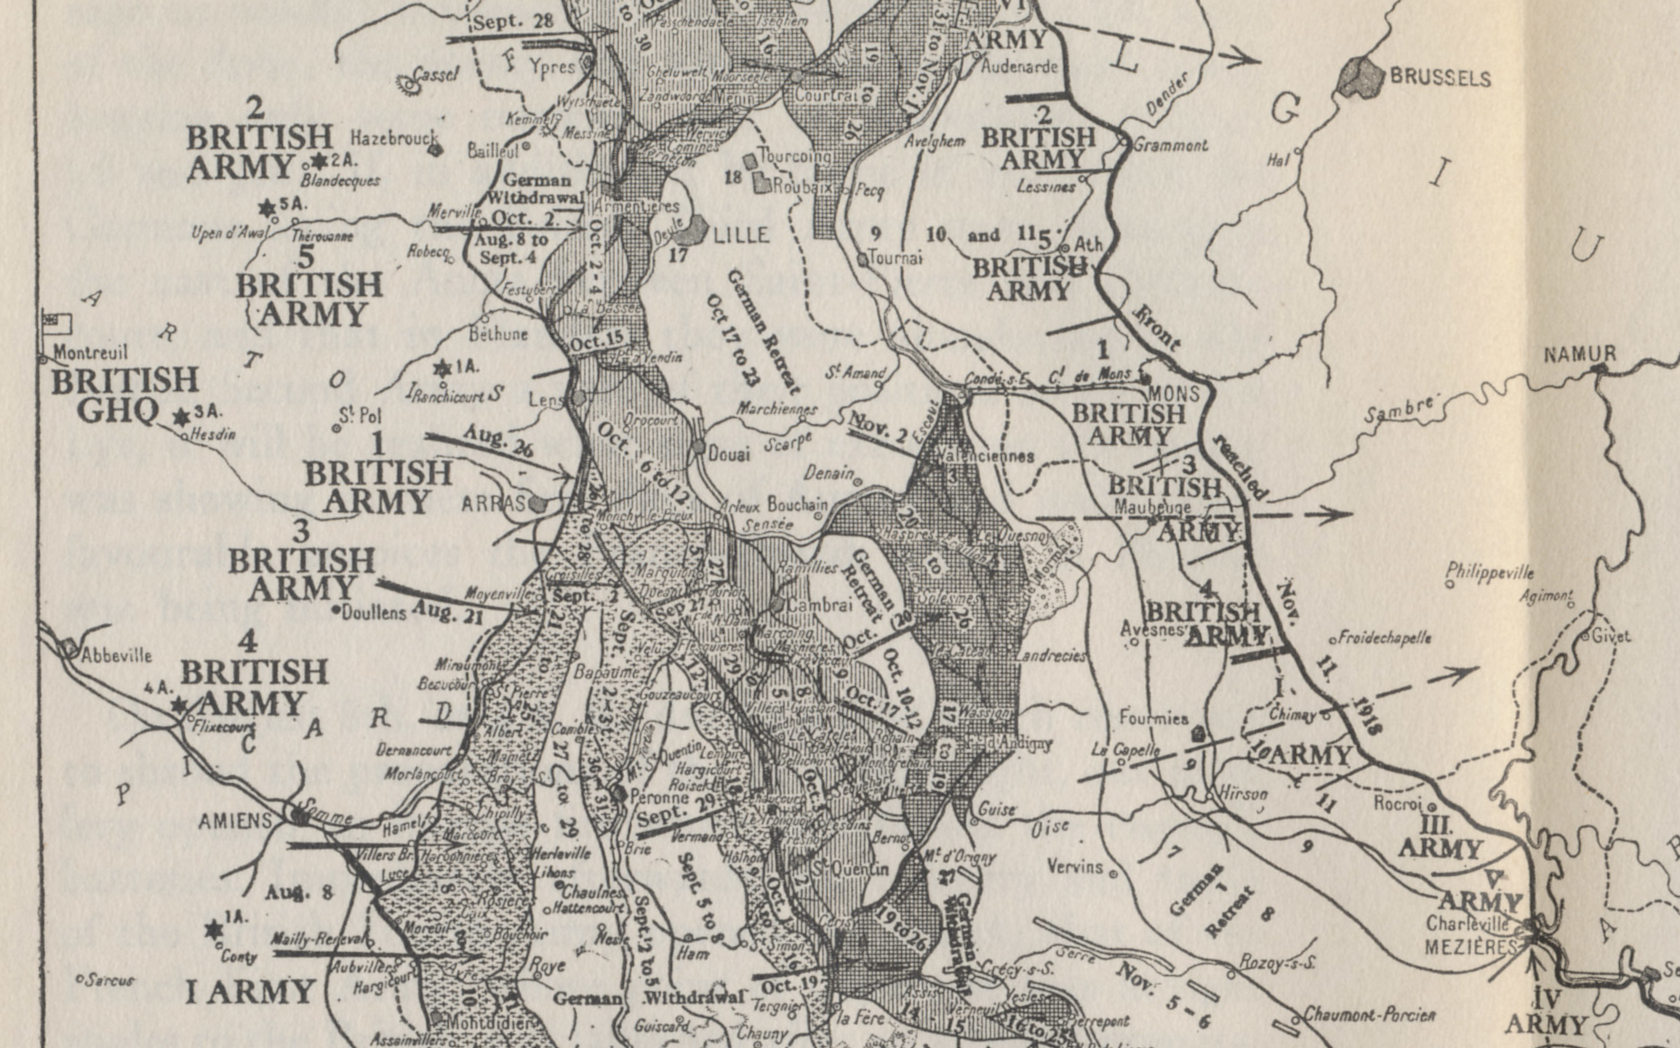 Detail showing the British sector of the Western Front from a map of the Allied offensives of 1918, from July 18 and the Second Battle of the Marne to the Armistice on November 11. From %i1%The Memoirs of Marshall Foch%i0% by Marshall Foch. The 1st and other armies to the south are French.